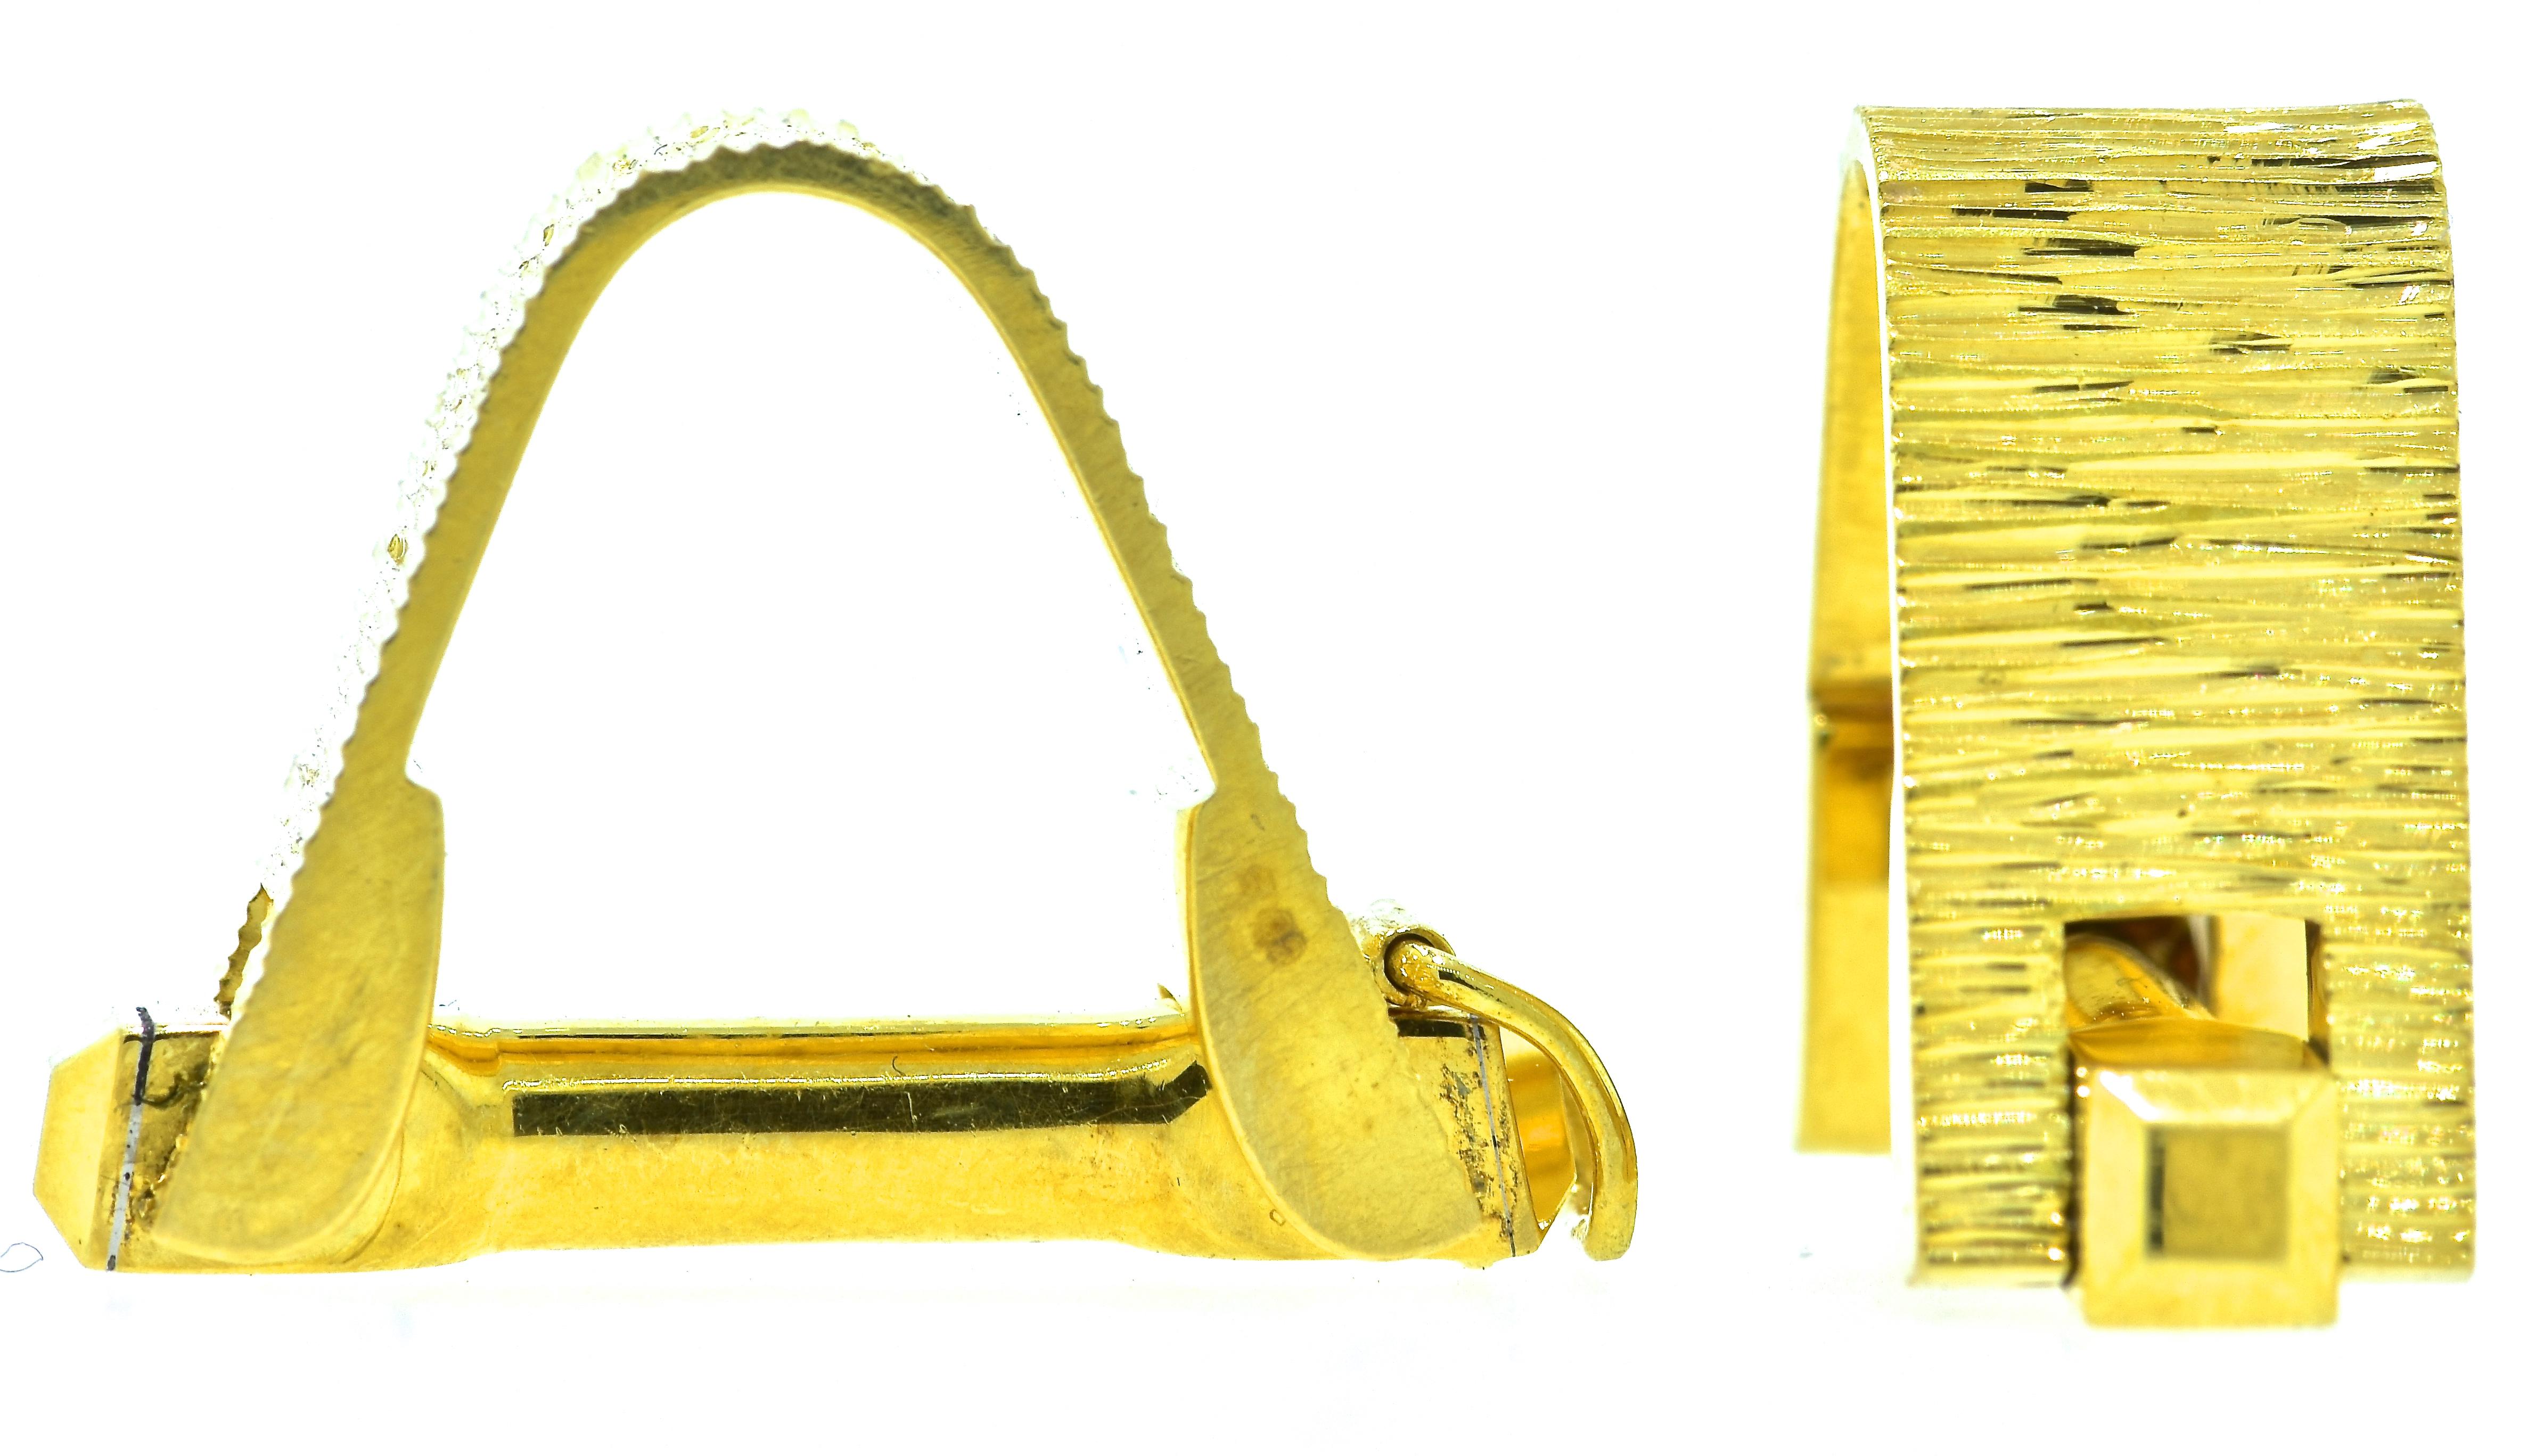 18K yellow gold cufflinks made mid-20th century.  Stirrup style, these cufflinks are well made with fine engineering.  With a locking mechanism, these cufflinks are easy to get on and off.  They weigh 18.43 grams of 18k yellow gold.